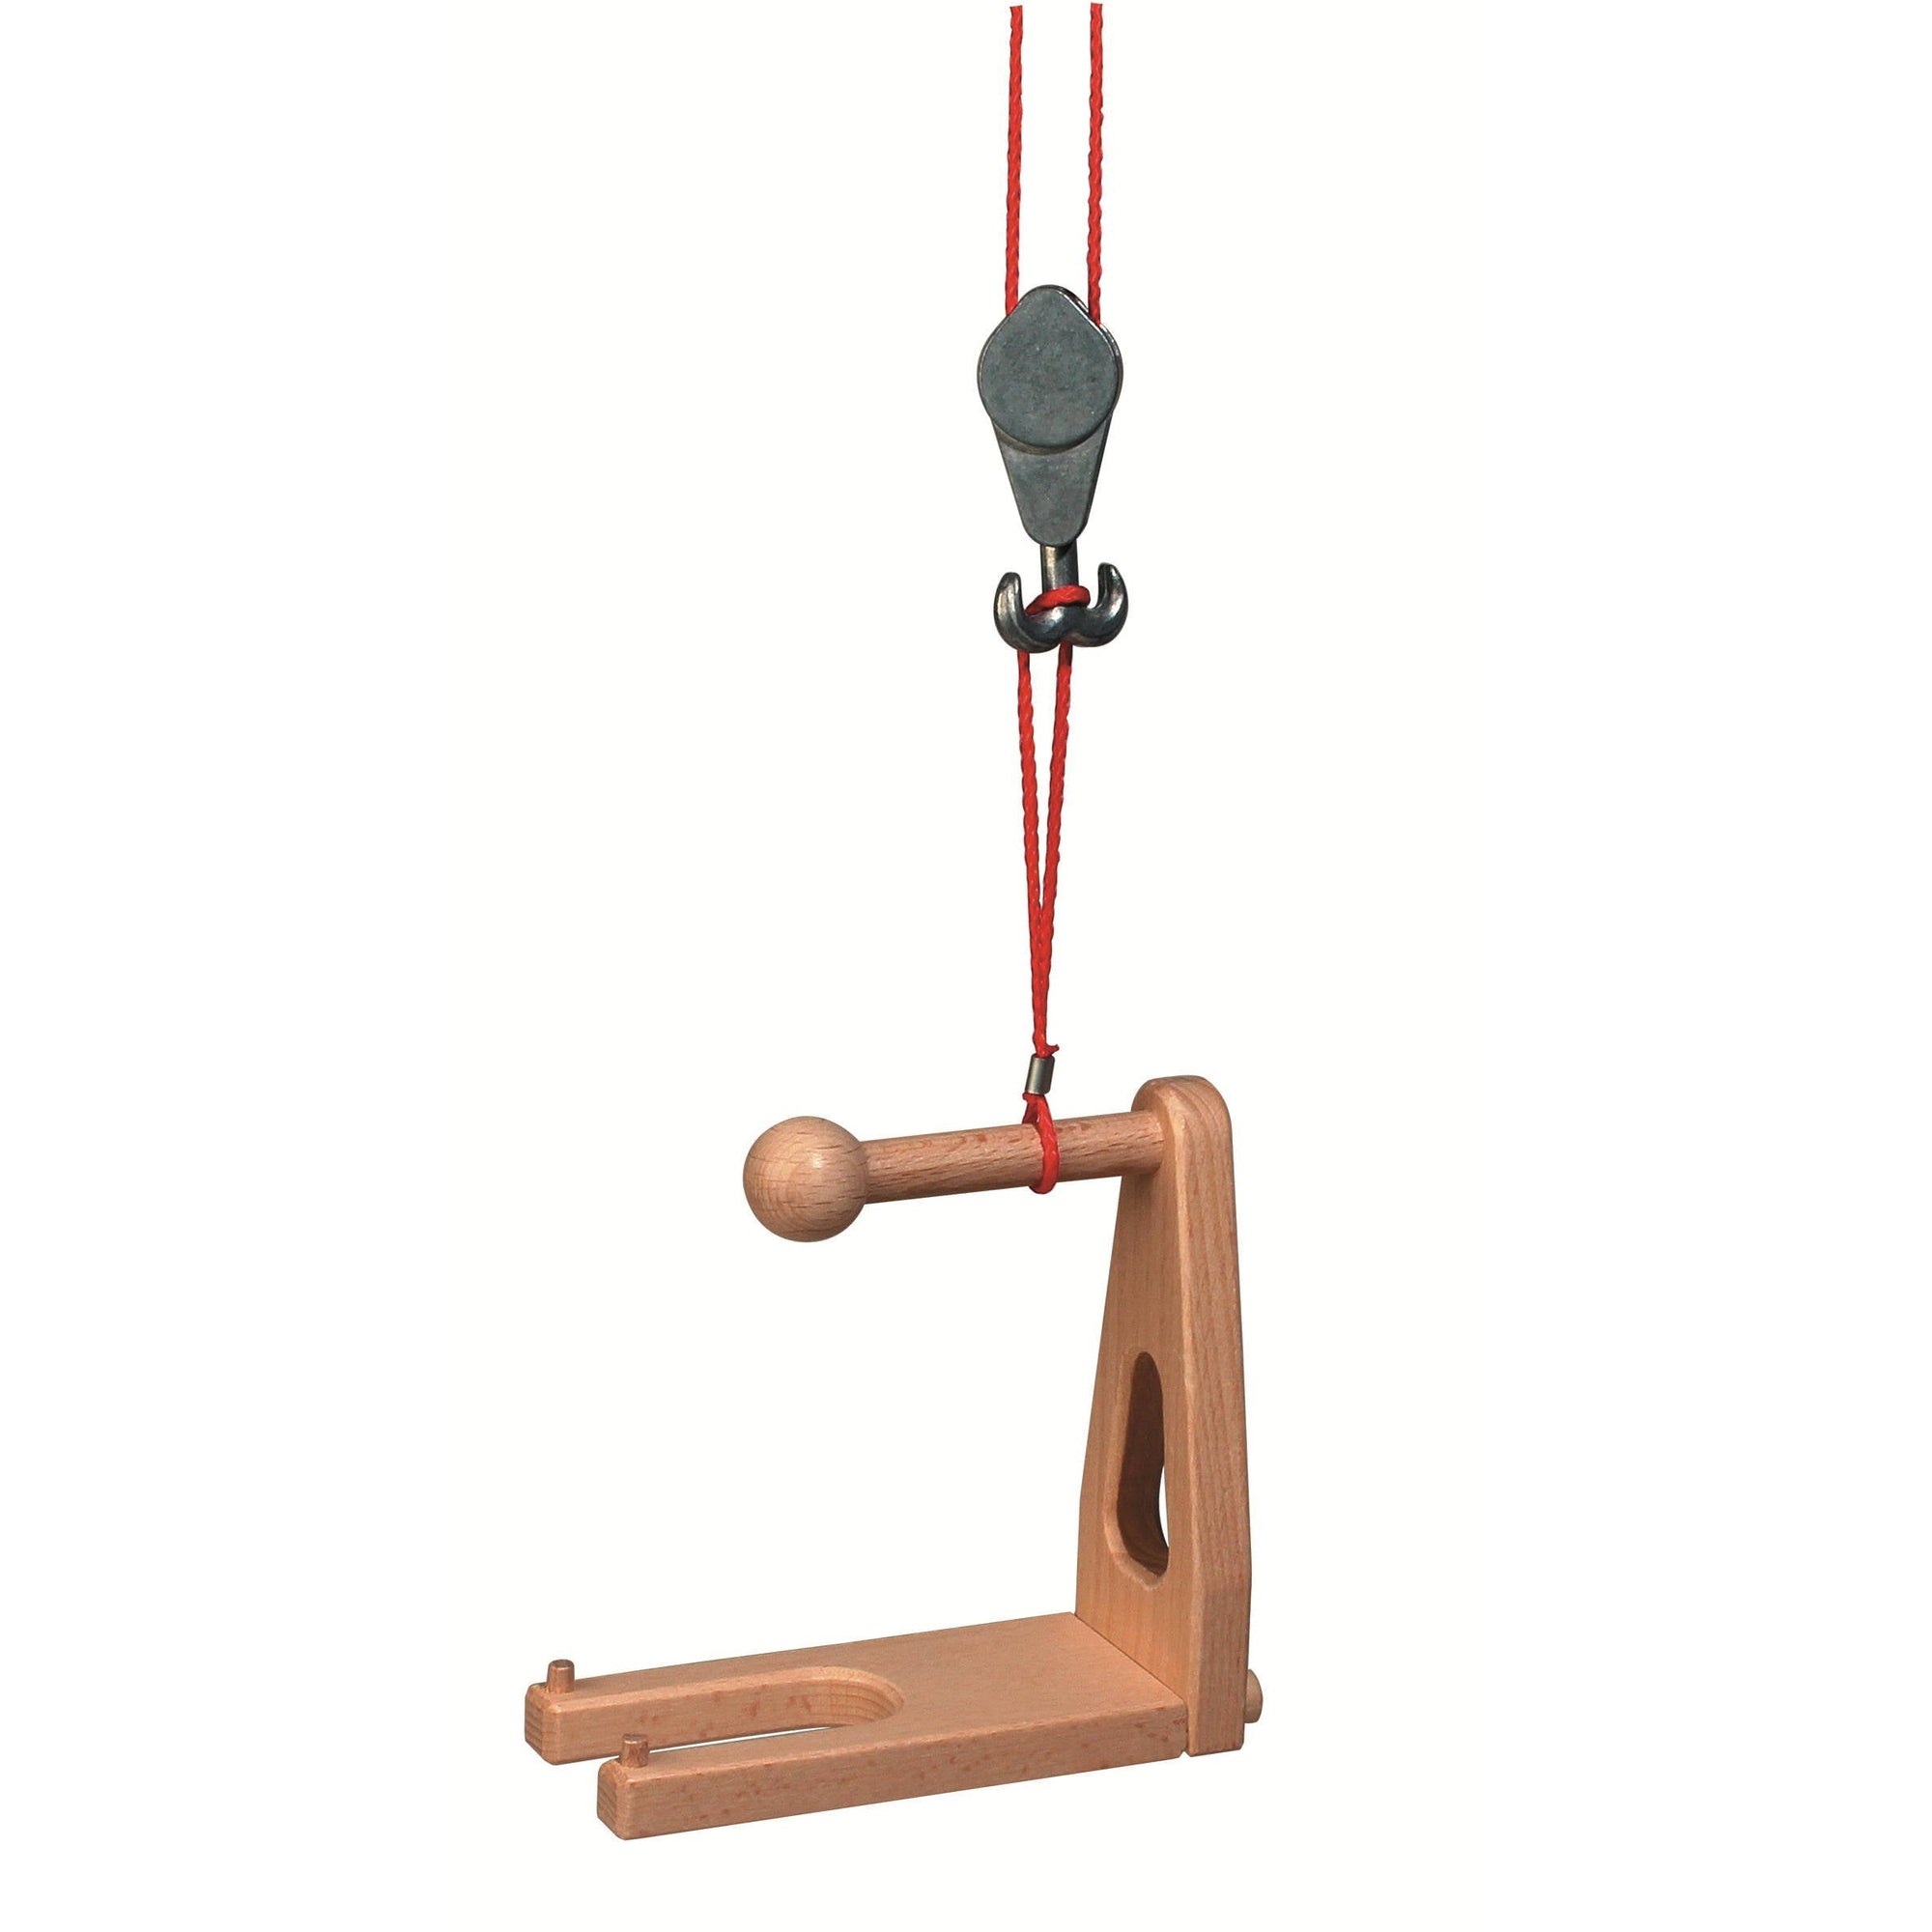 Fagus Vehicles - Loading Fork Extension for Cranes - SECONDS-Warehouse Find-Modern Rascals